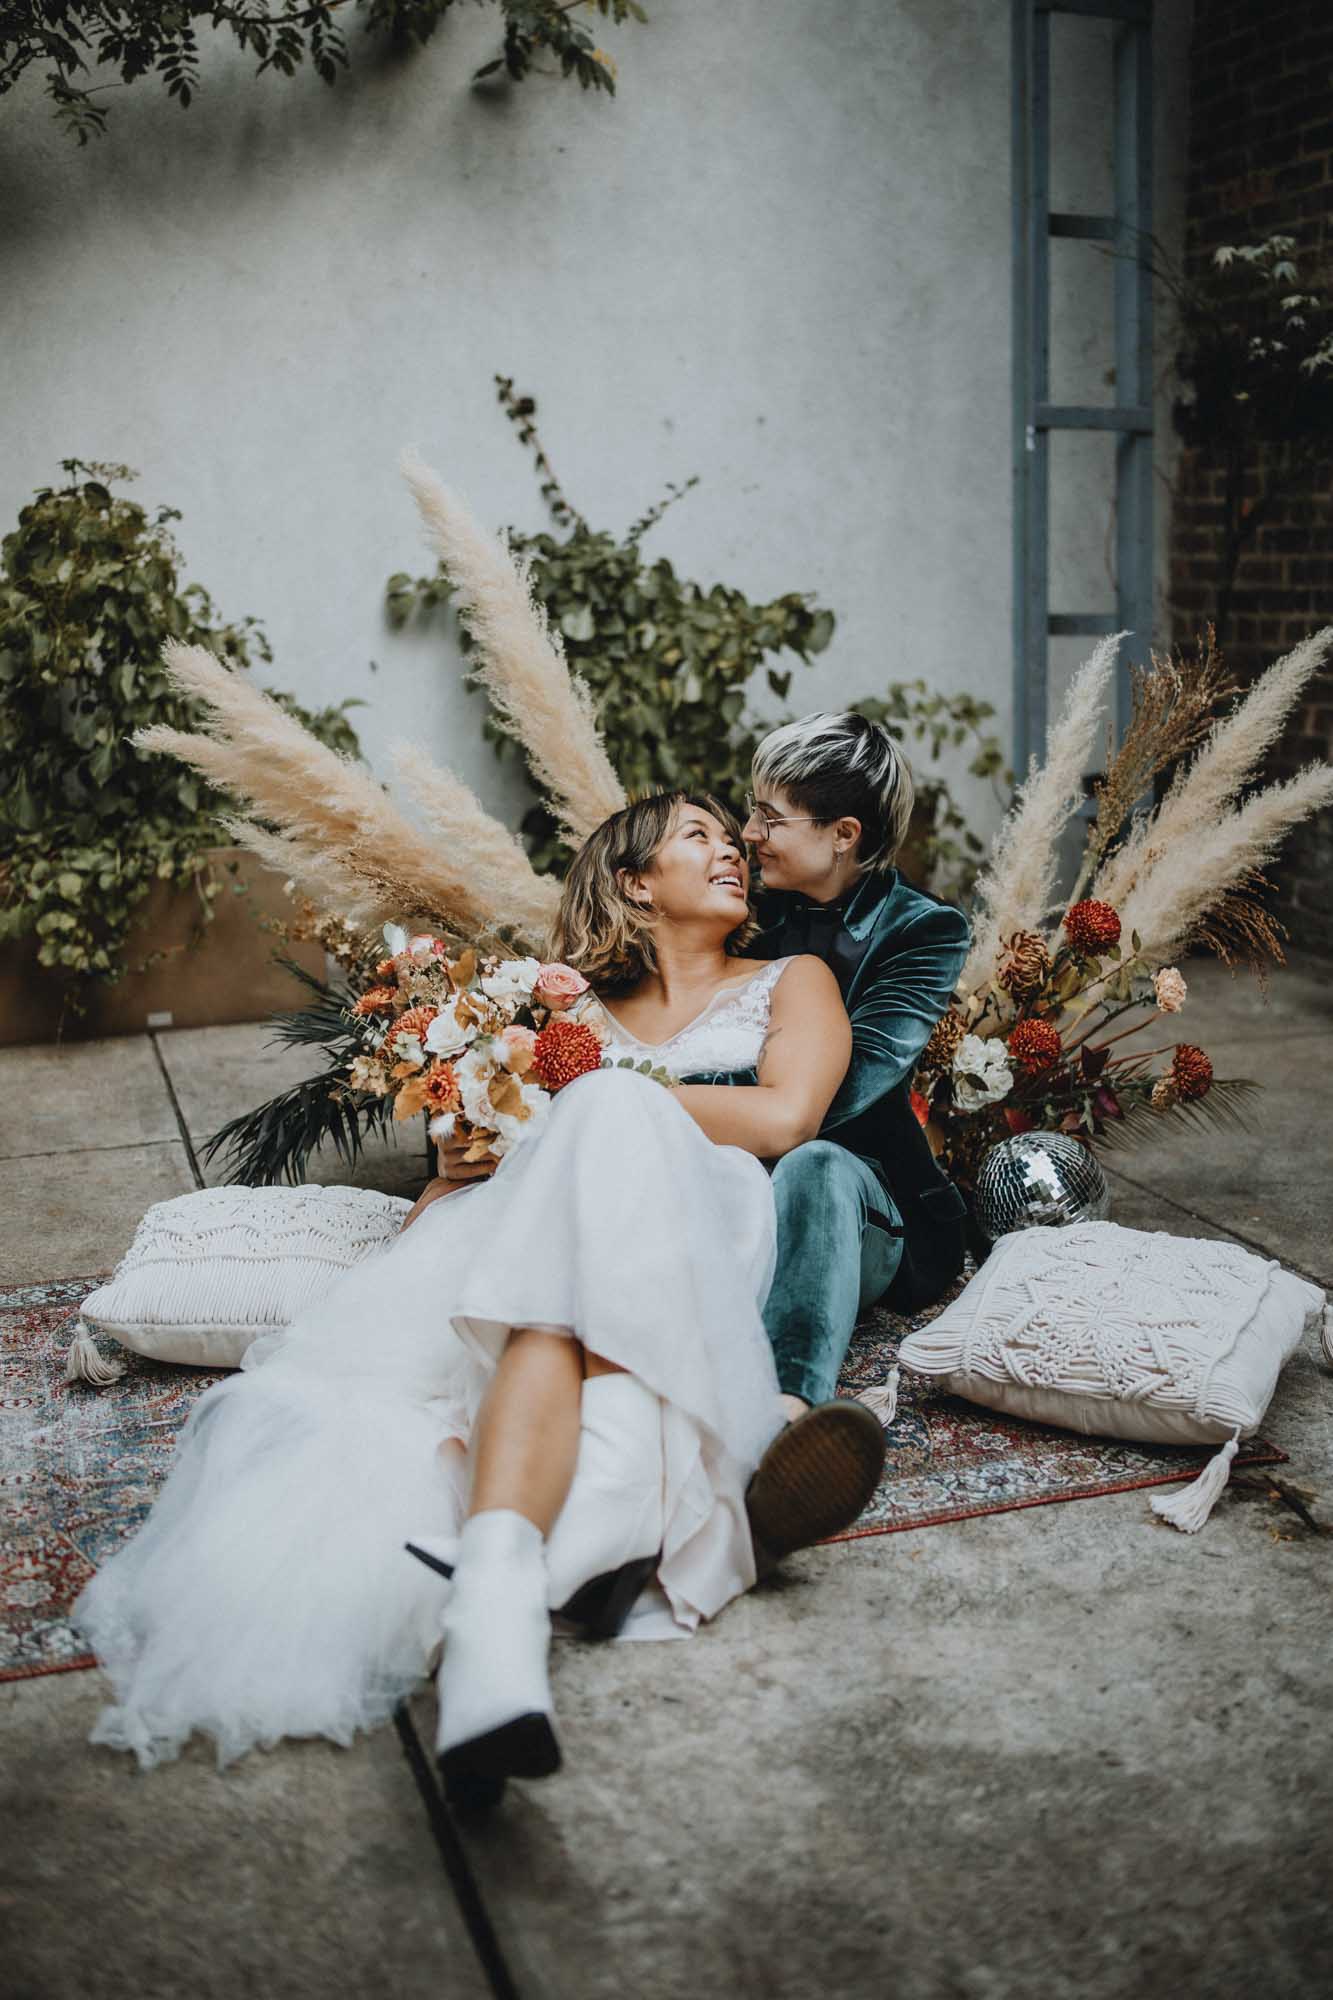 Outdoor Brooklyn microwedding styled shoot | Photography by Lucie B Photography | Featured on Equally Wed, the world's leading LGBTQ+ wedding magazine | LGBTQ+ marriers relax on Boho decor after saying I do